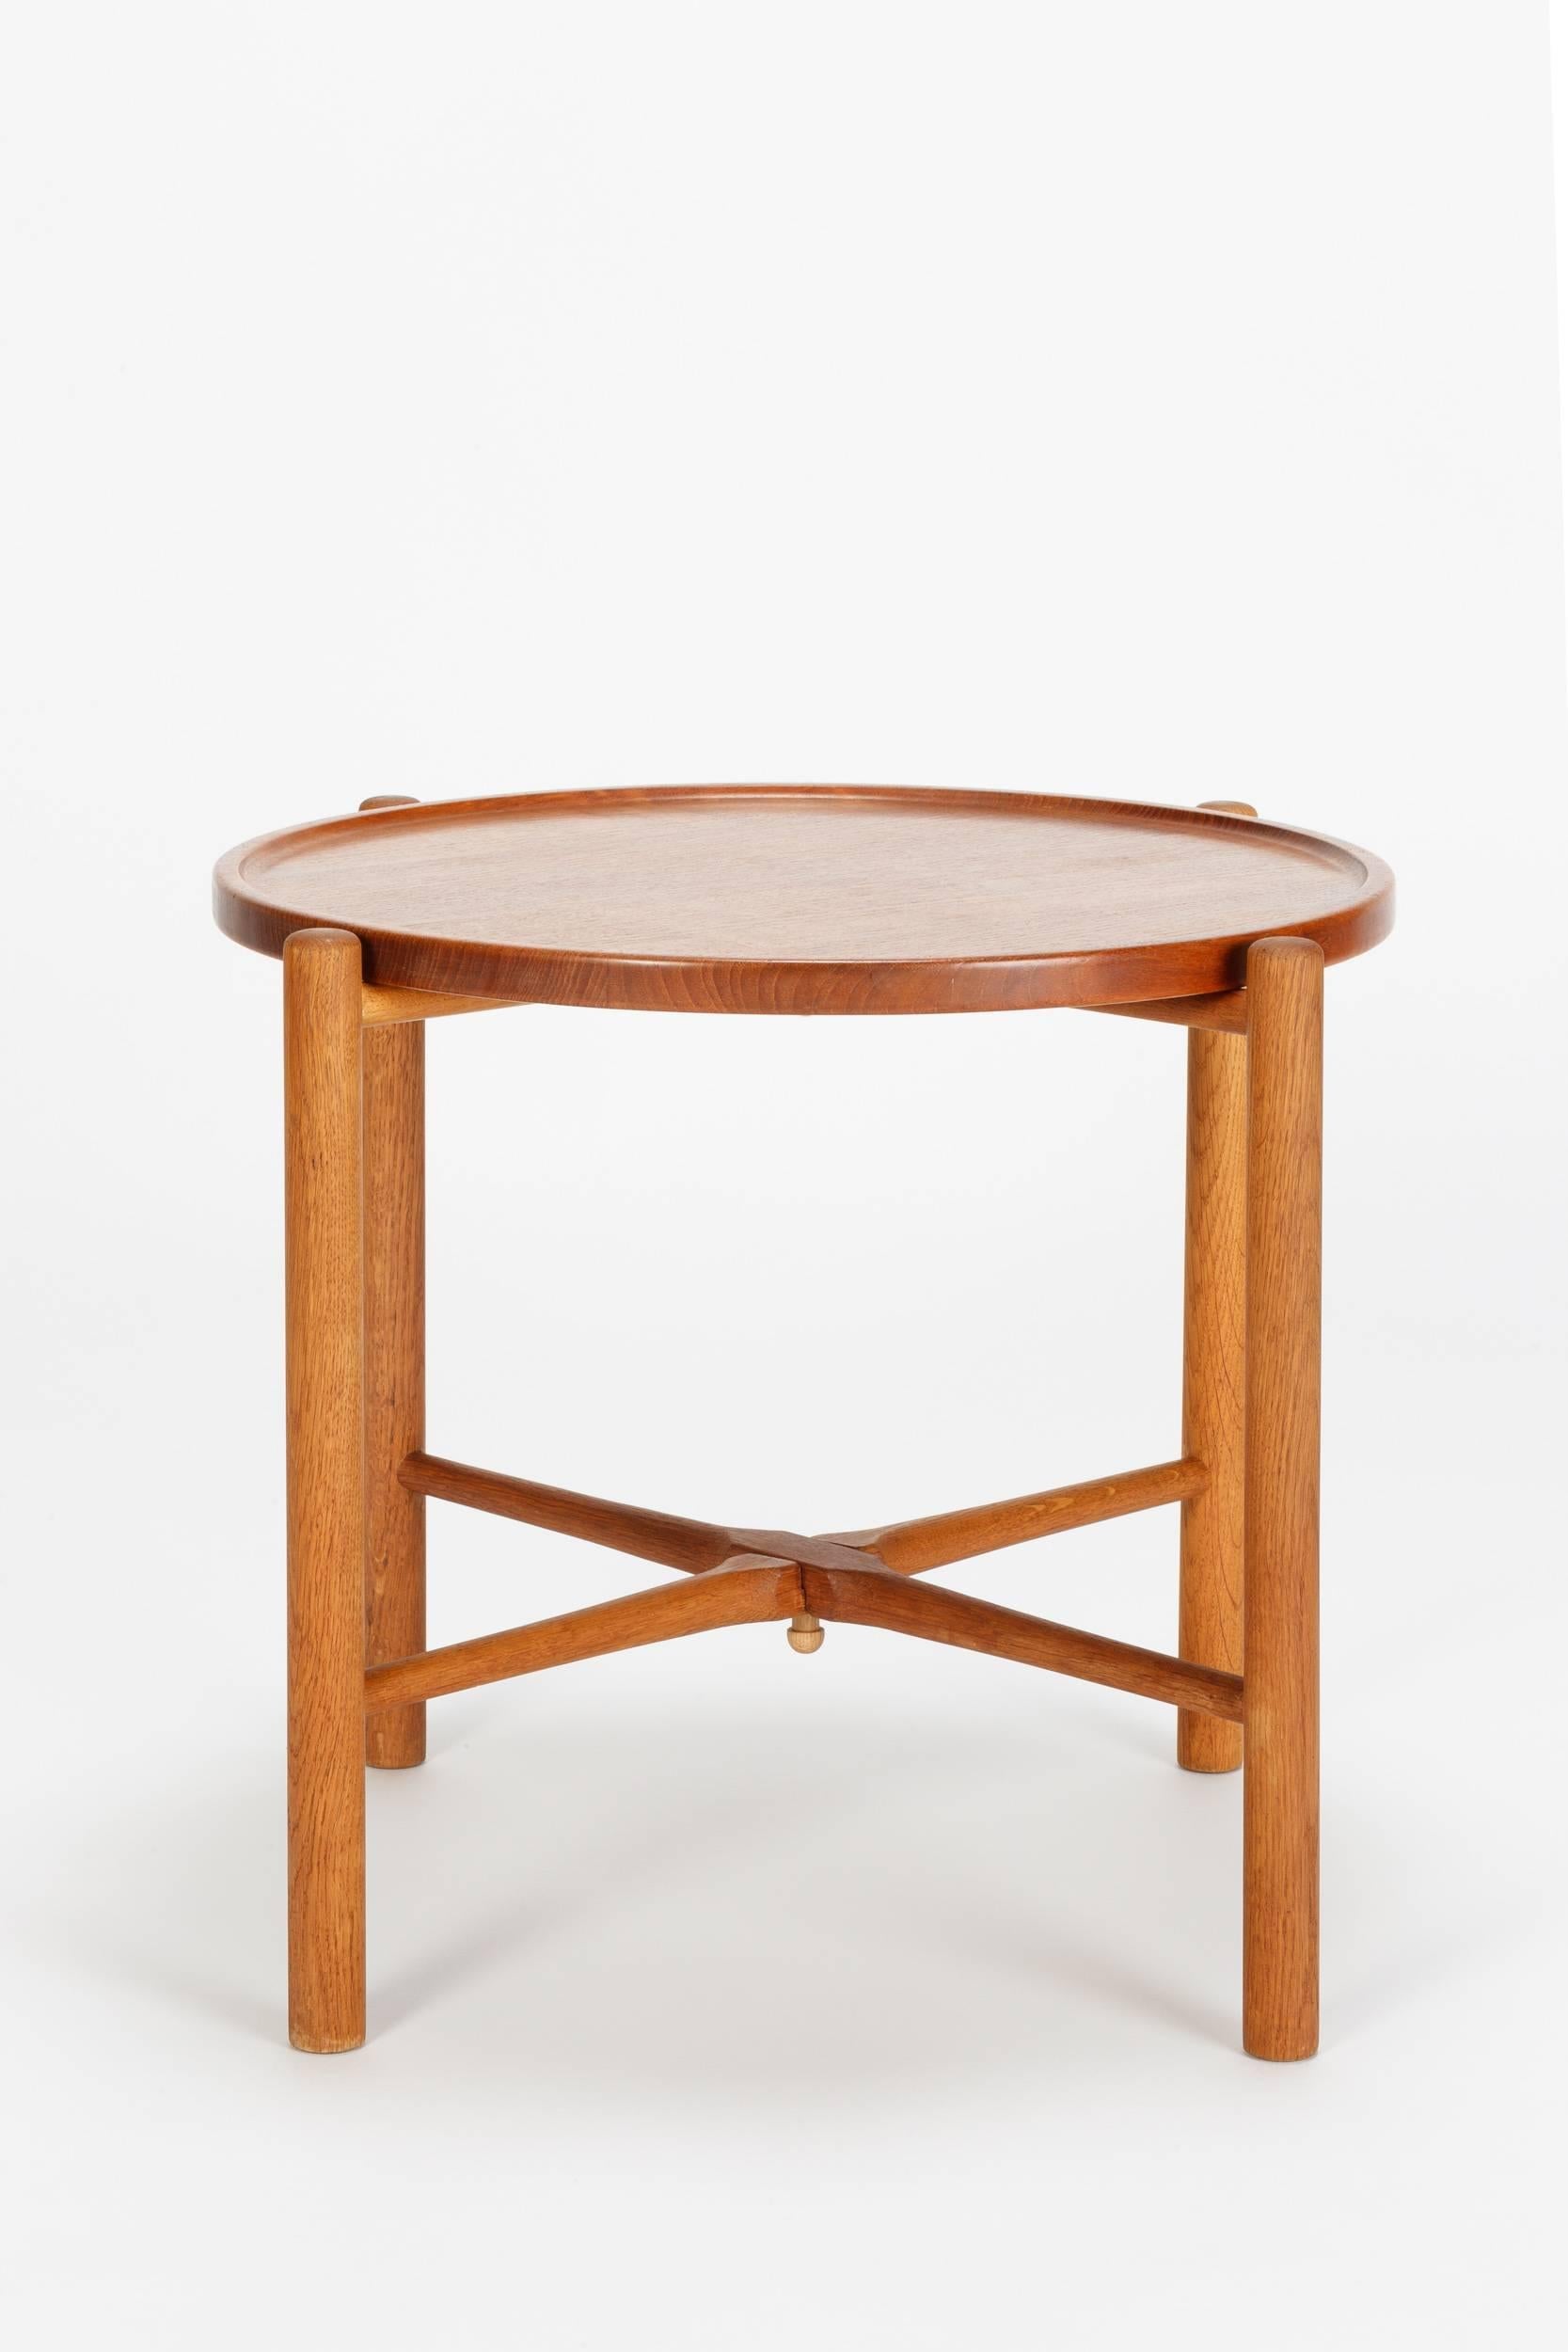 Very practical Hans Wegner folding table model AT-35, designed in 1945 and manufactured  by Andreas Tuck in Denmark in the 1950's. The top tray is made of solid teak wood, the oak base is foldable. Stamped to underside with manufacturers label.